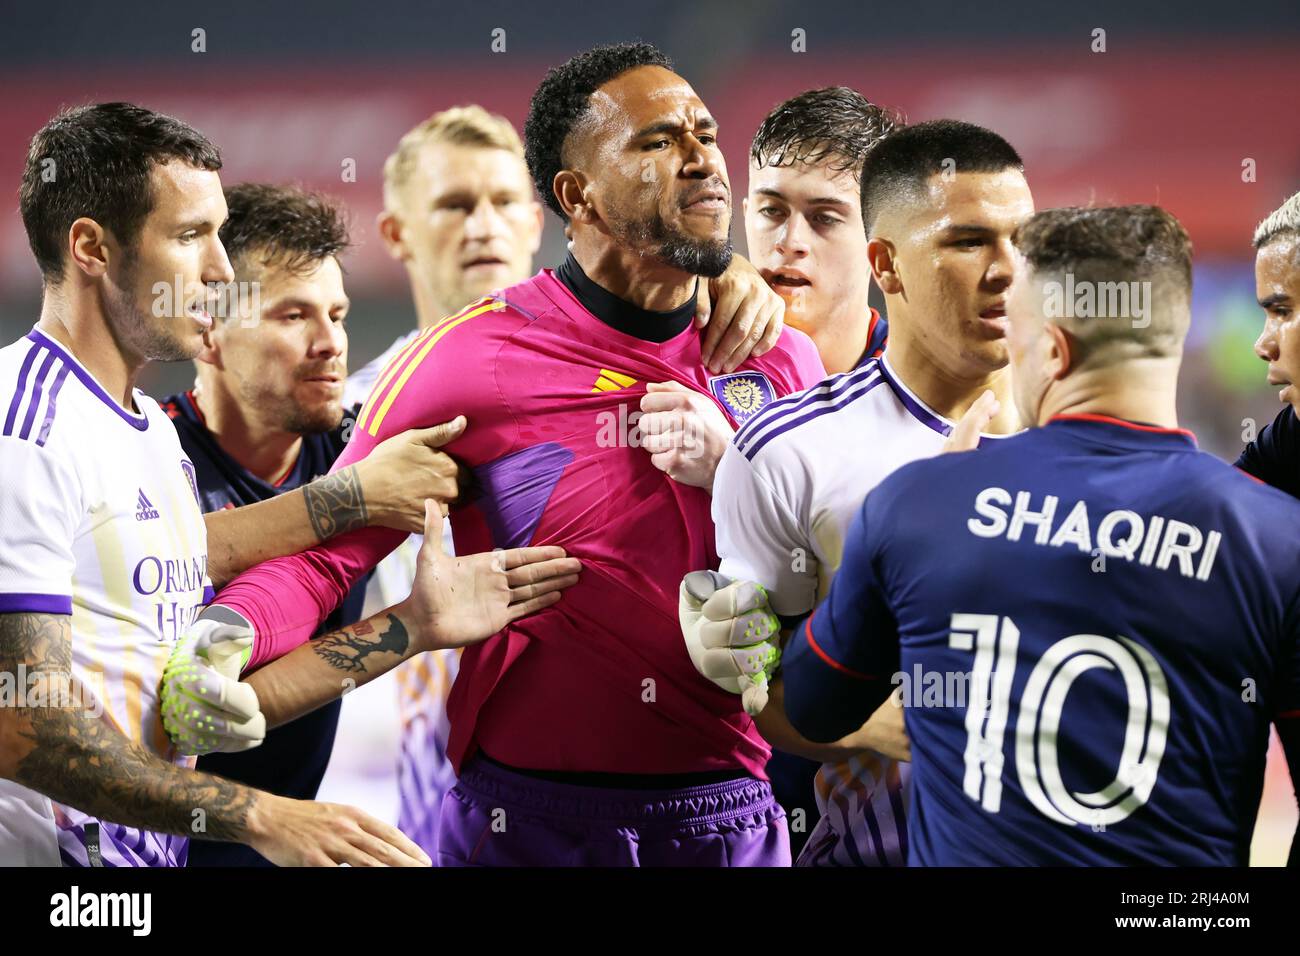 Chicago, USA, 20 August 2023. Major League Soccer (MLS) Orlando City SC goalkeeper Pedro Gallese is held back from confronting Chicago Fire FC's Xherdan Shaqiri (10) at Soldier Field in Chicago, IL, USA. Credit: Tony Gadomski / All Sport Imaging / Alamy Live News Stock Photo